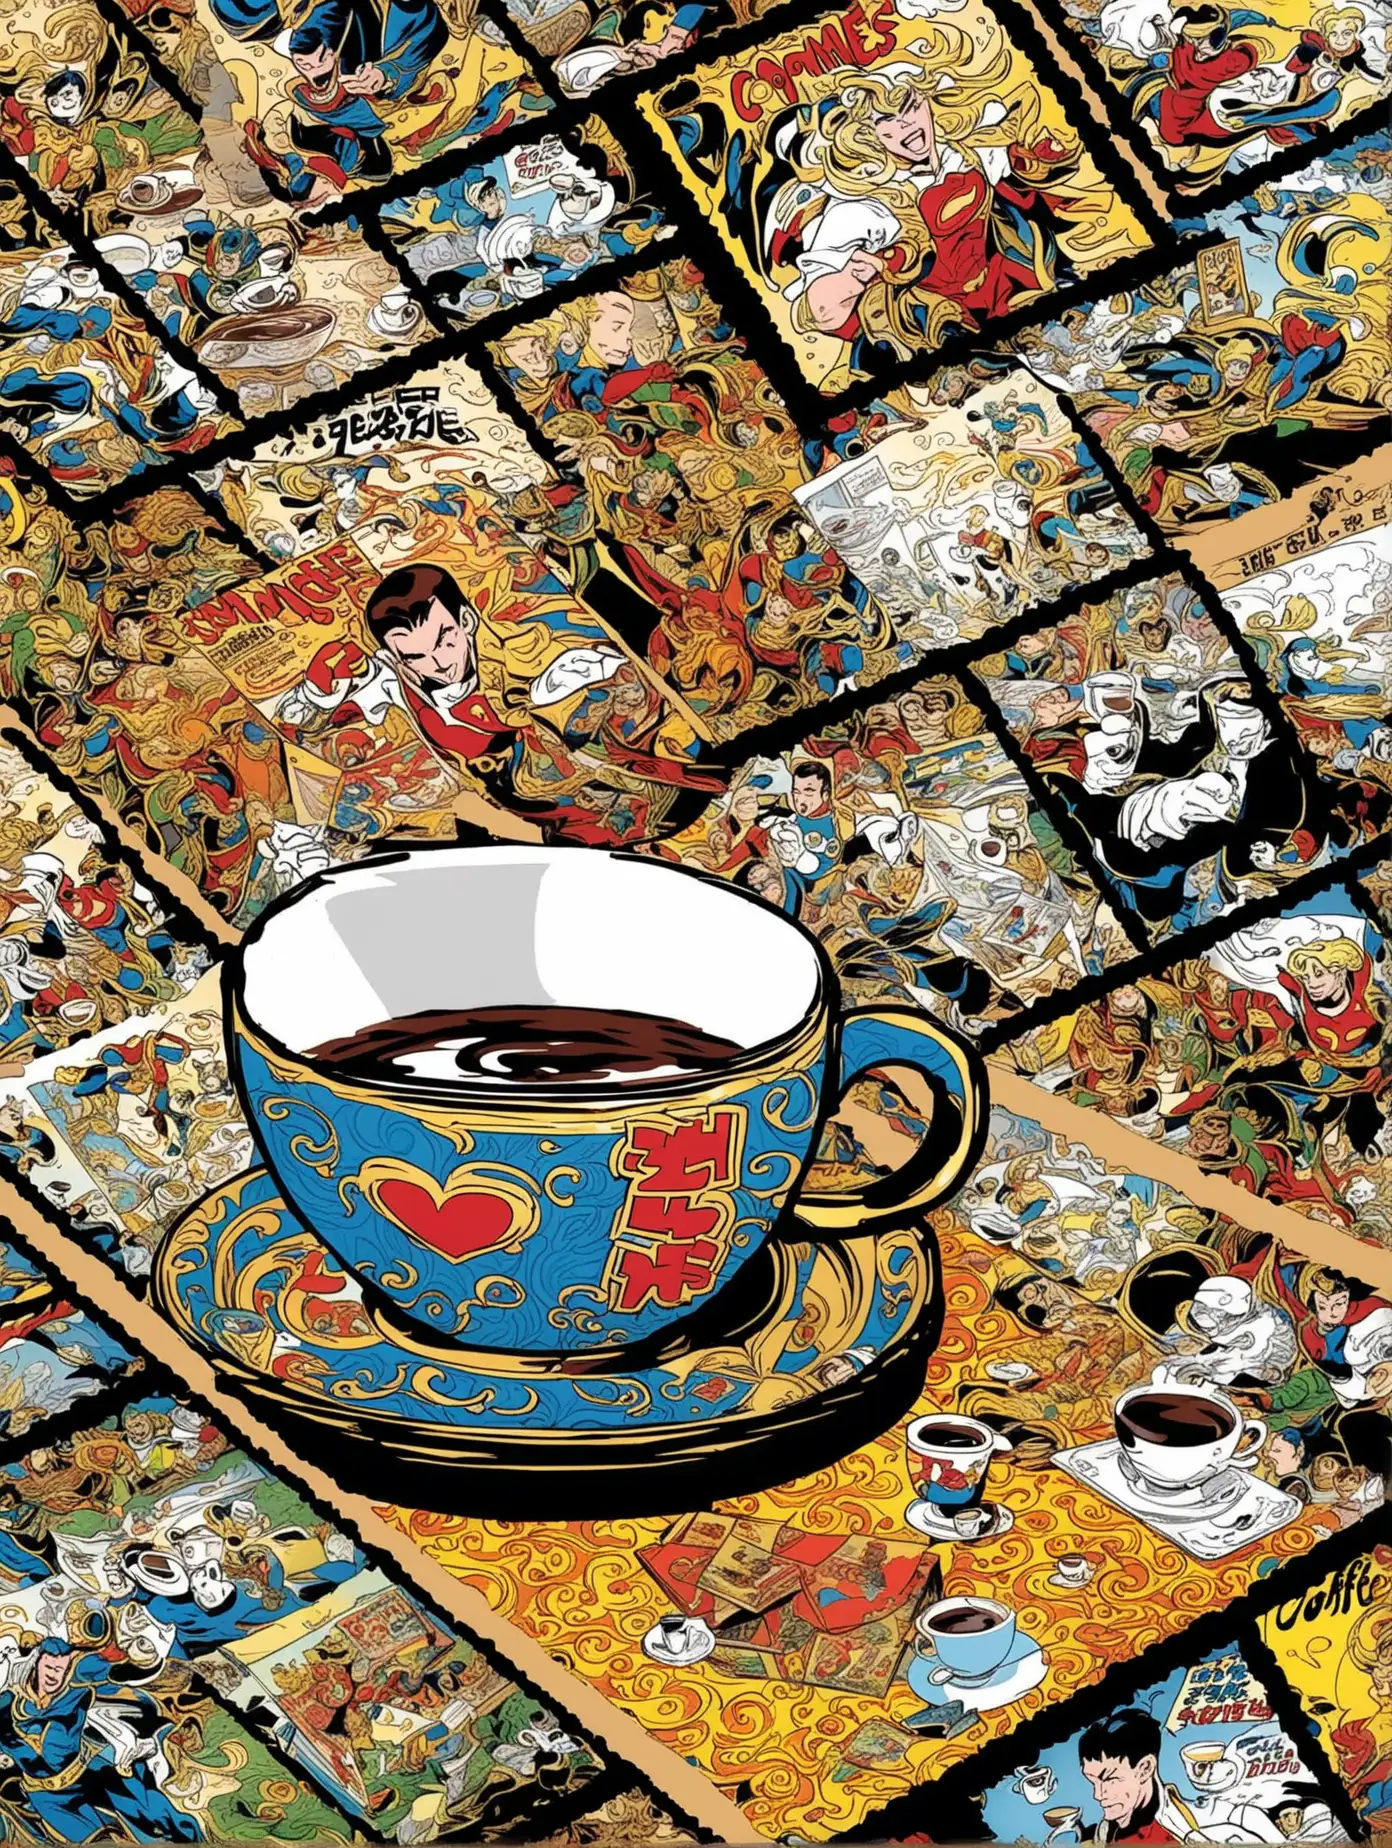 Coffee Break in a Comic Book Cafe with Cloisonn Decor